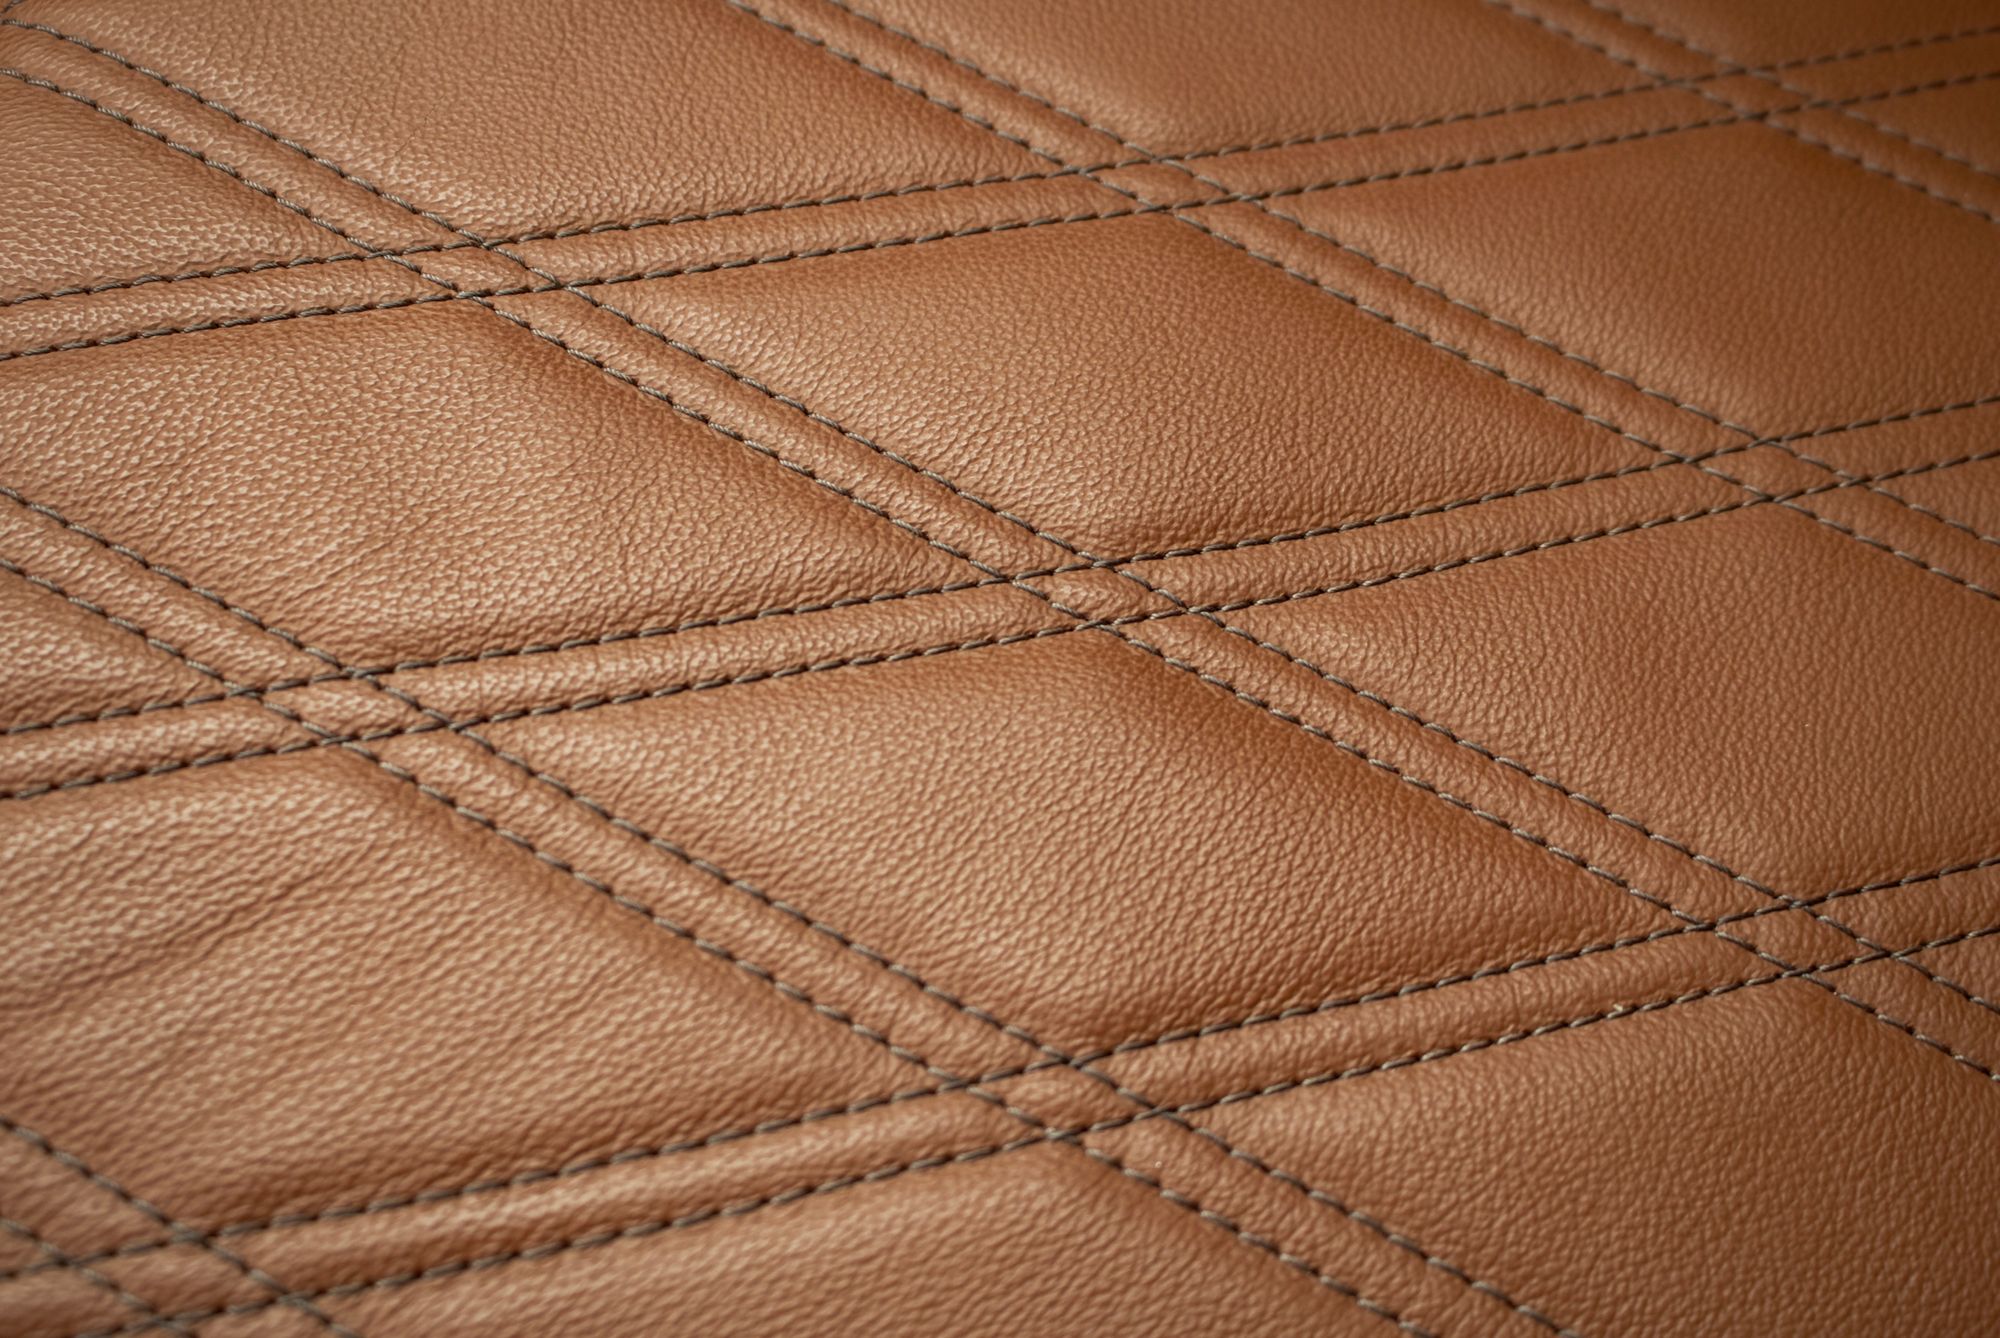 Reducing the Cost of Leather Manufacturing